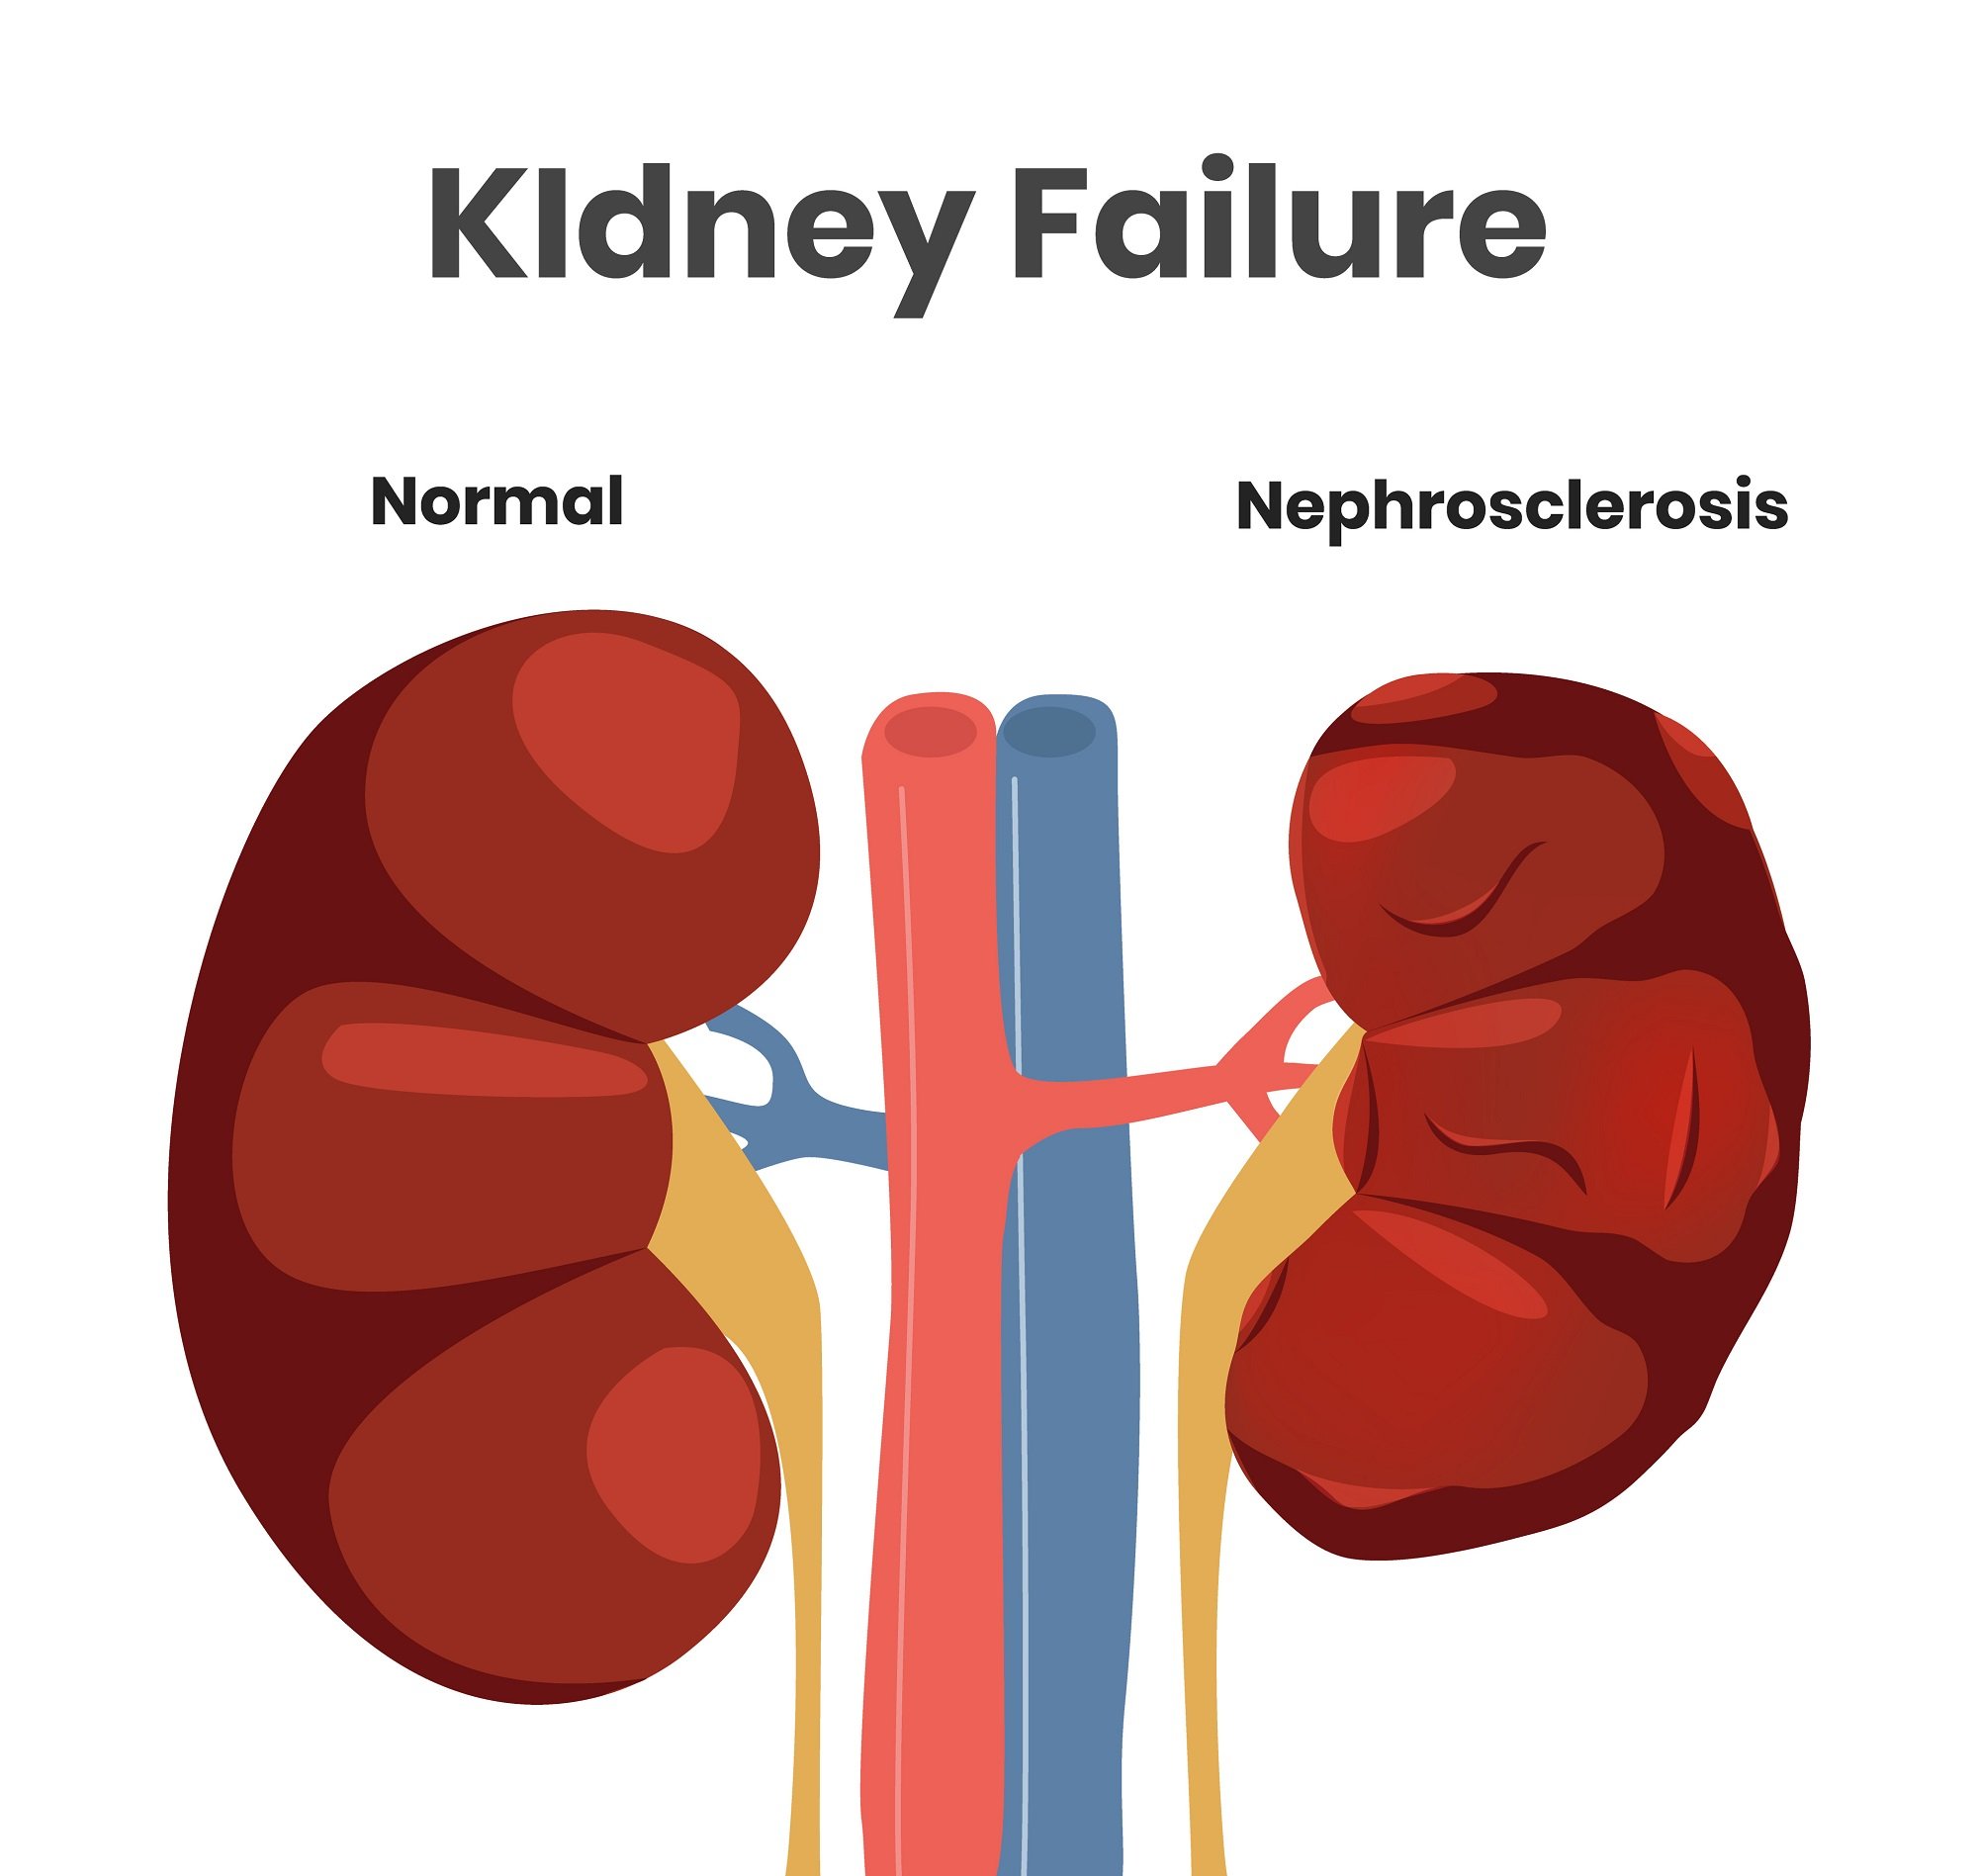 Vector illustration of the kidney failure. Normal kidney versus kidney affected with nephrosclerosis. Scalable illustration of the urine system with the vessels